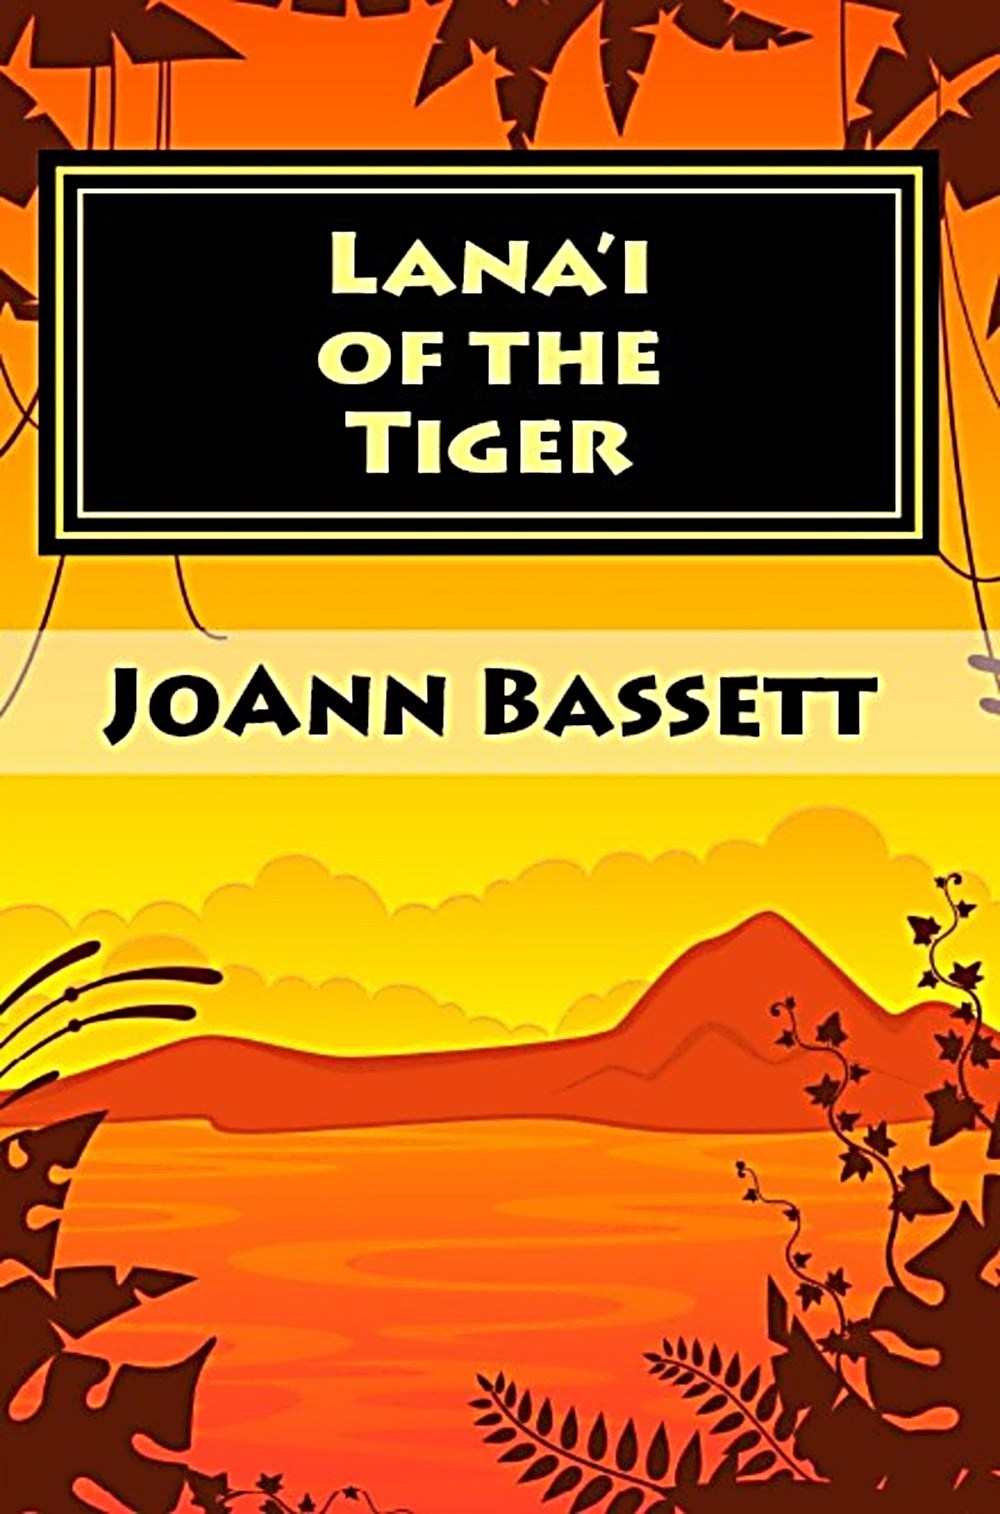 Lana'i of the Tiger (Islands of Aloha Mystery Series Book 3)